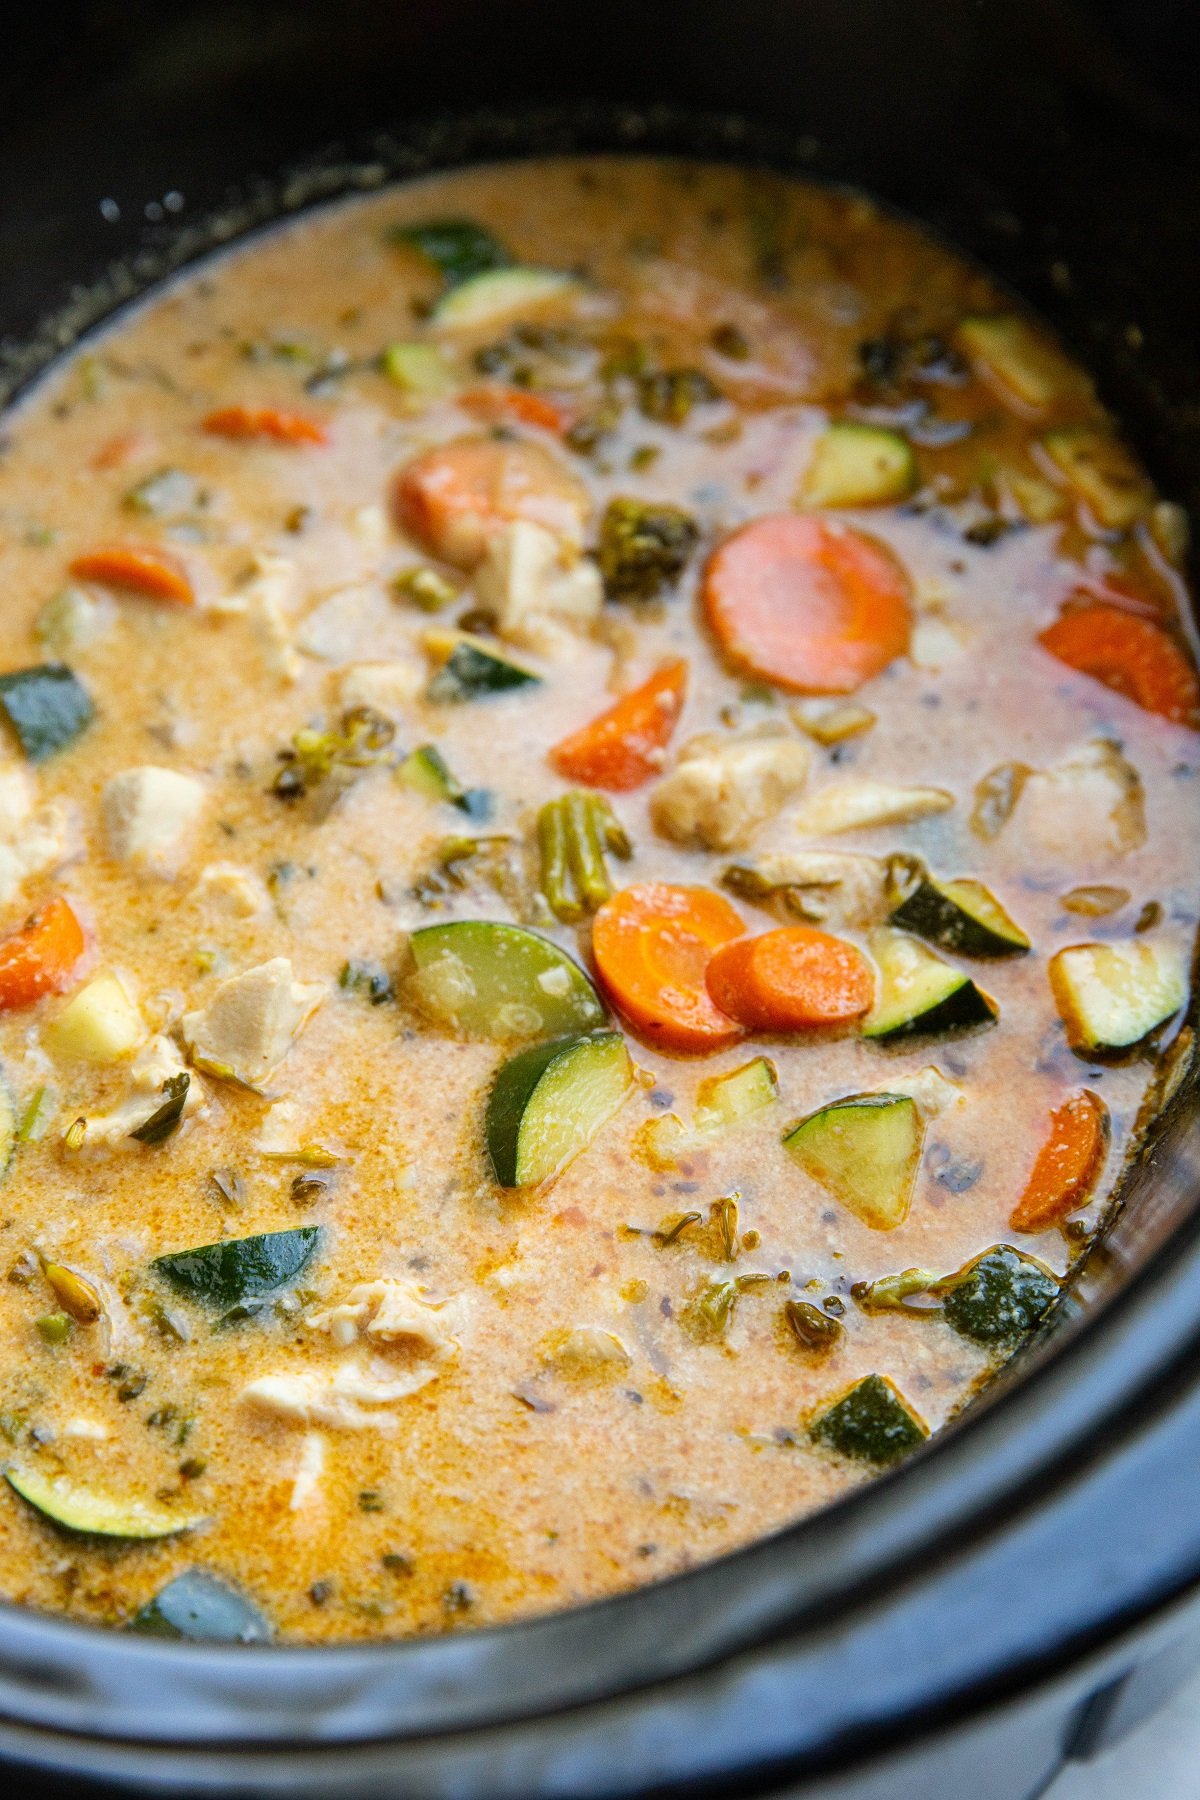 Crock Pot Thai Red Curry Chicken in a slow cooker, ready to serve and eat.